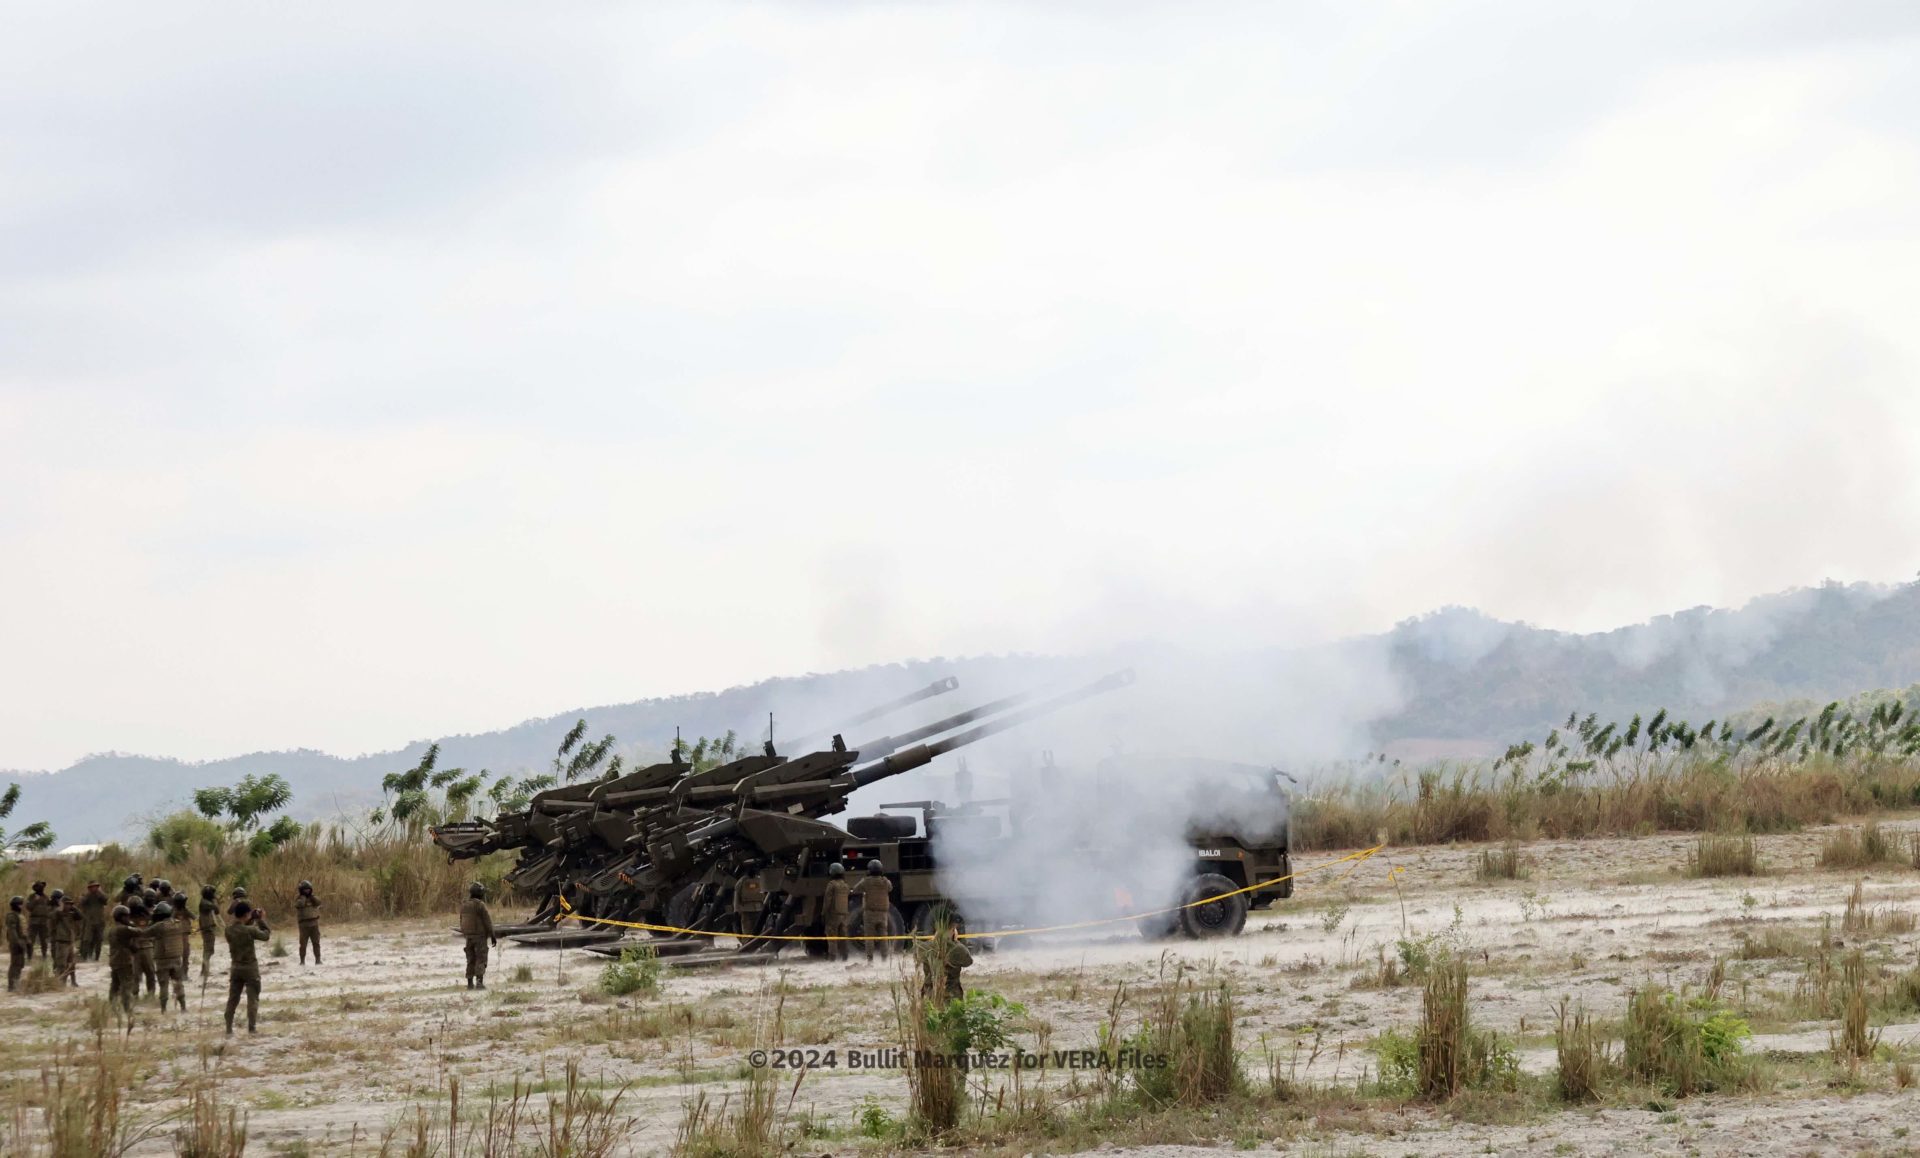 The Philippine Army shows off its territorial defense capability 4/8 Photo by Bullit Marquez for VERA Files